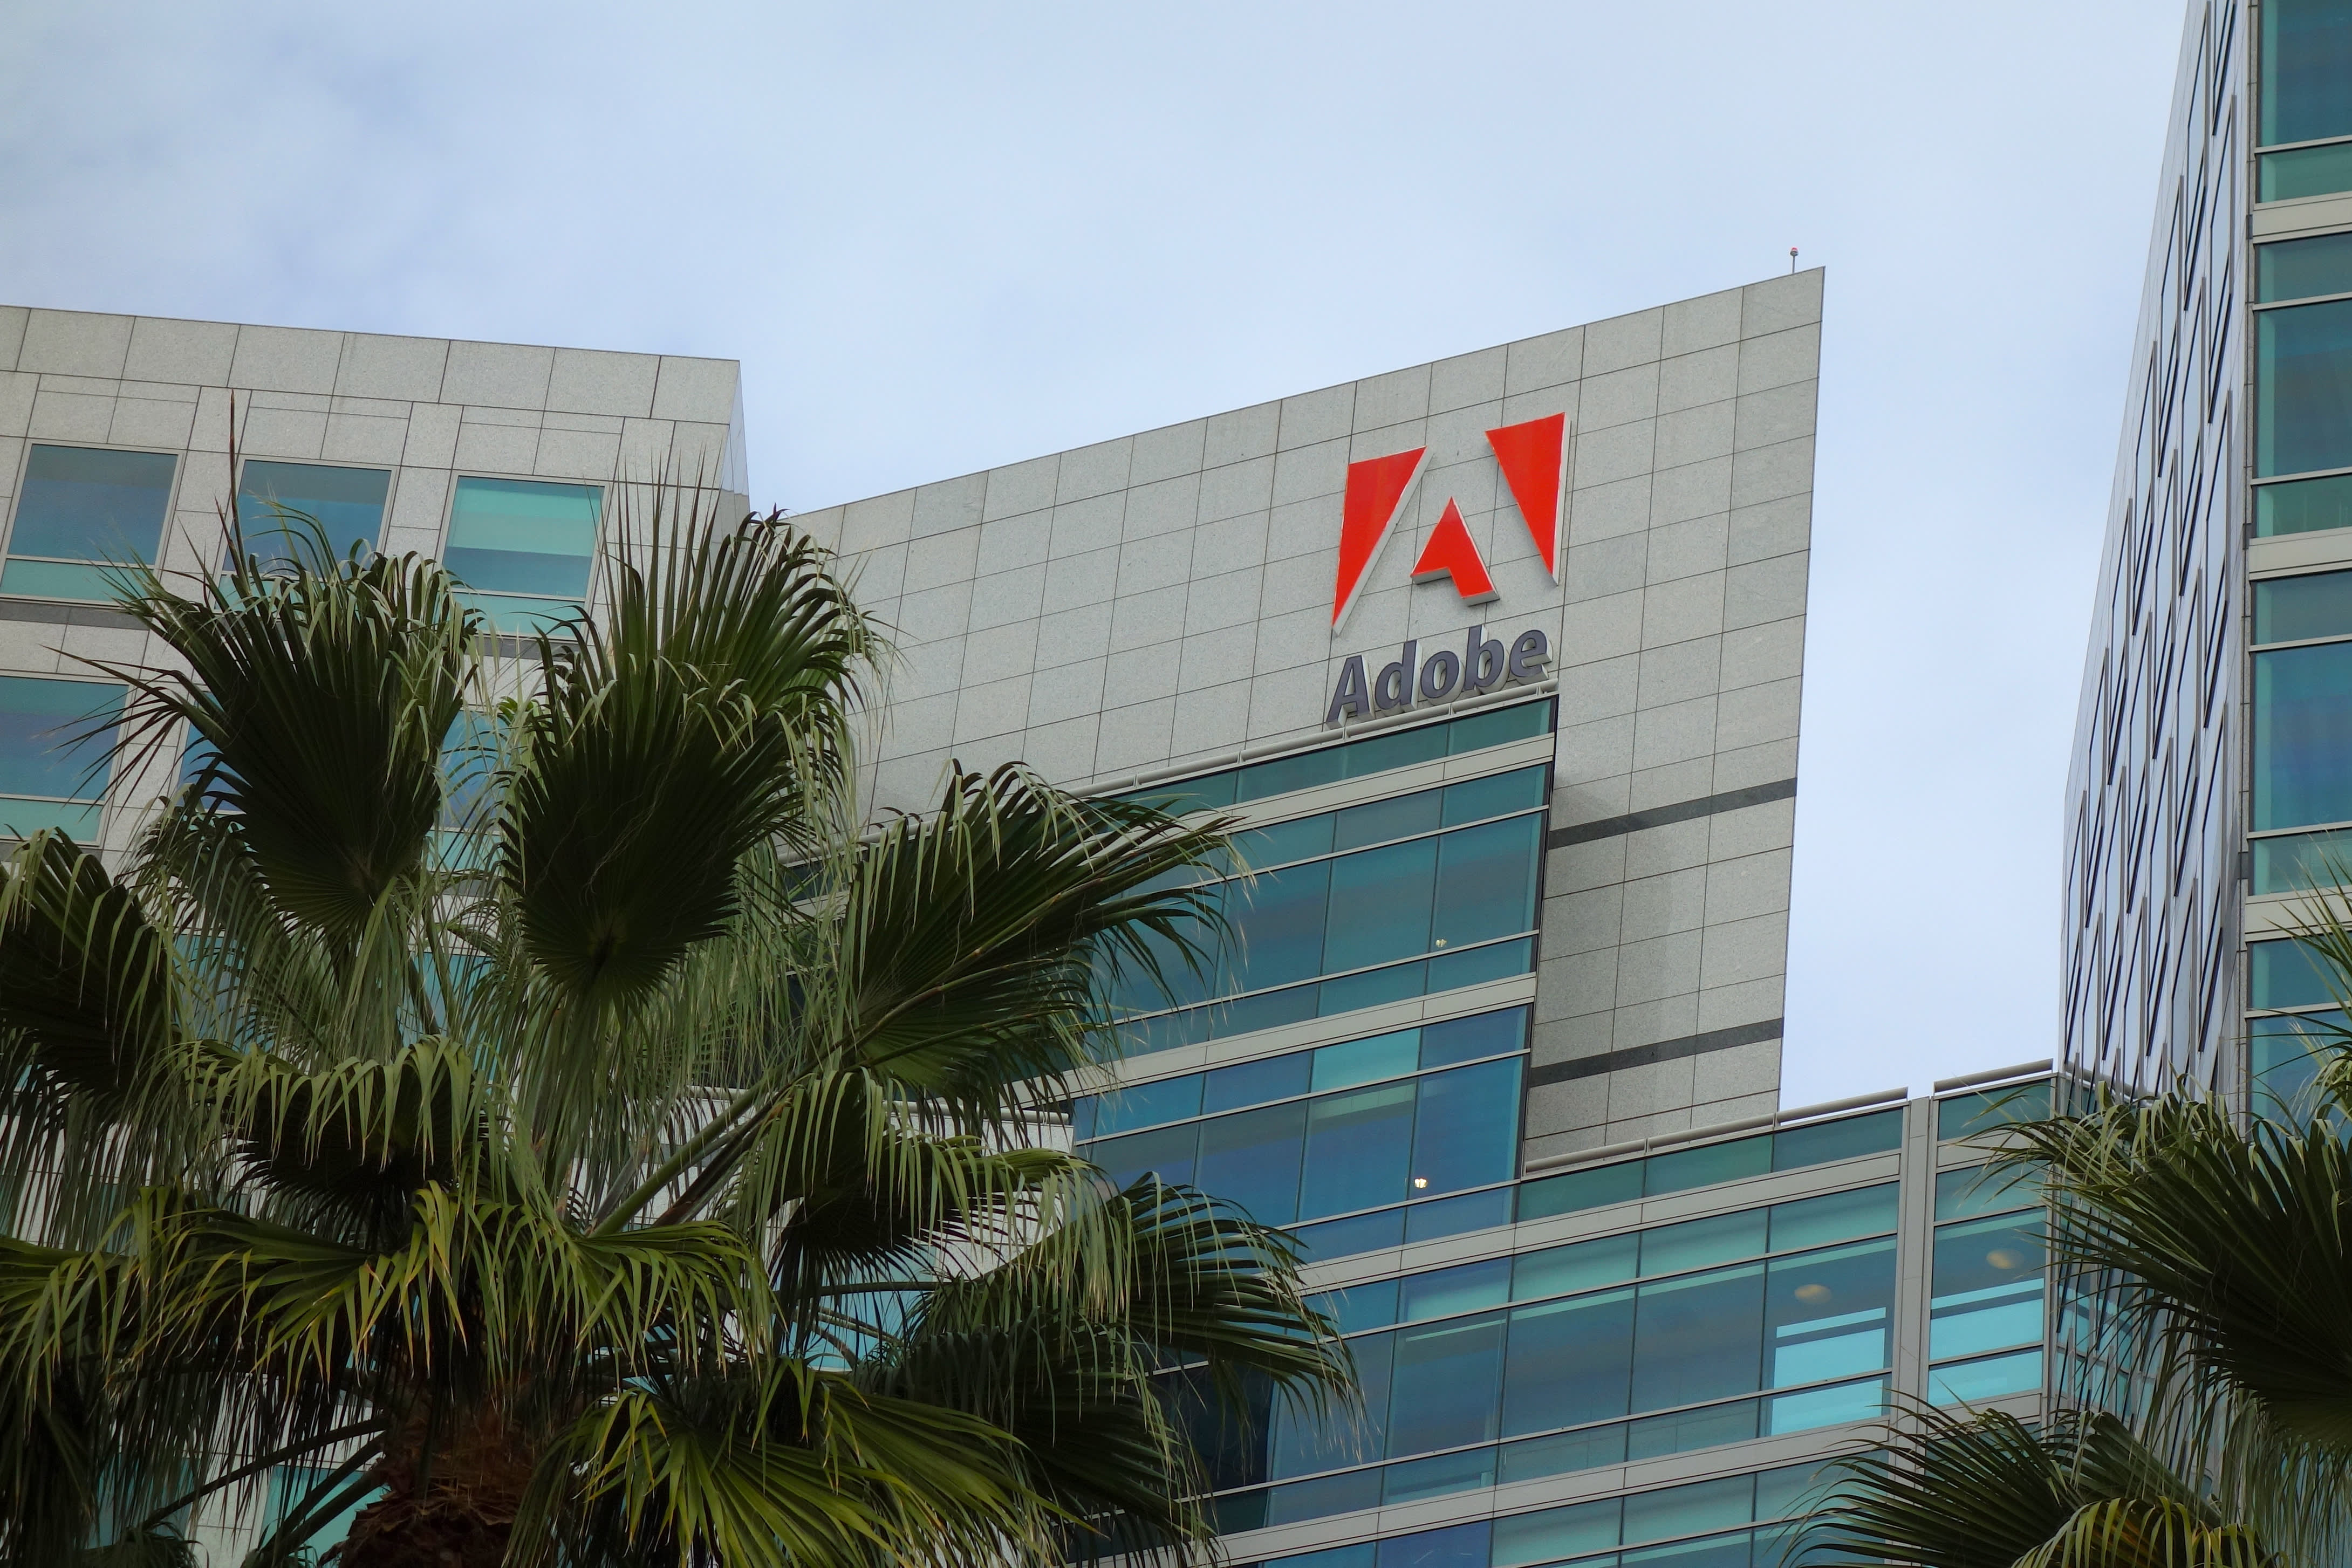 Adobe will put U.S. employees on unpaid leave if they’re not vaccinated by Dec. 8